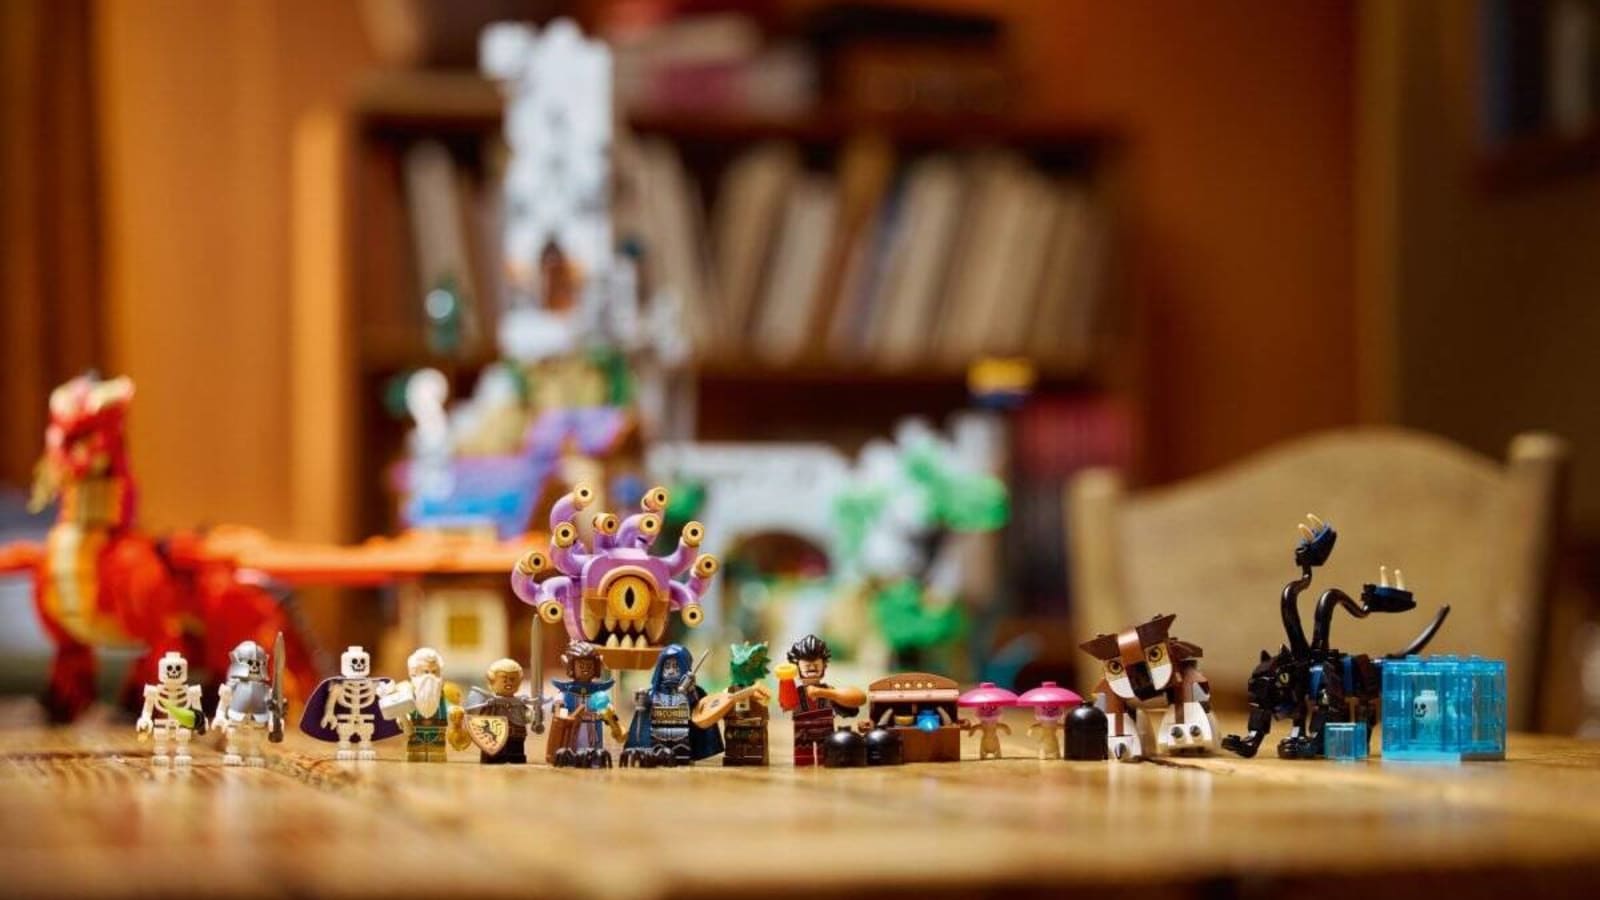 Embark on an Adventure with LEGO’s DUNGEONS & DRAGONS Set